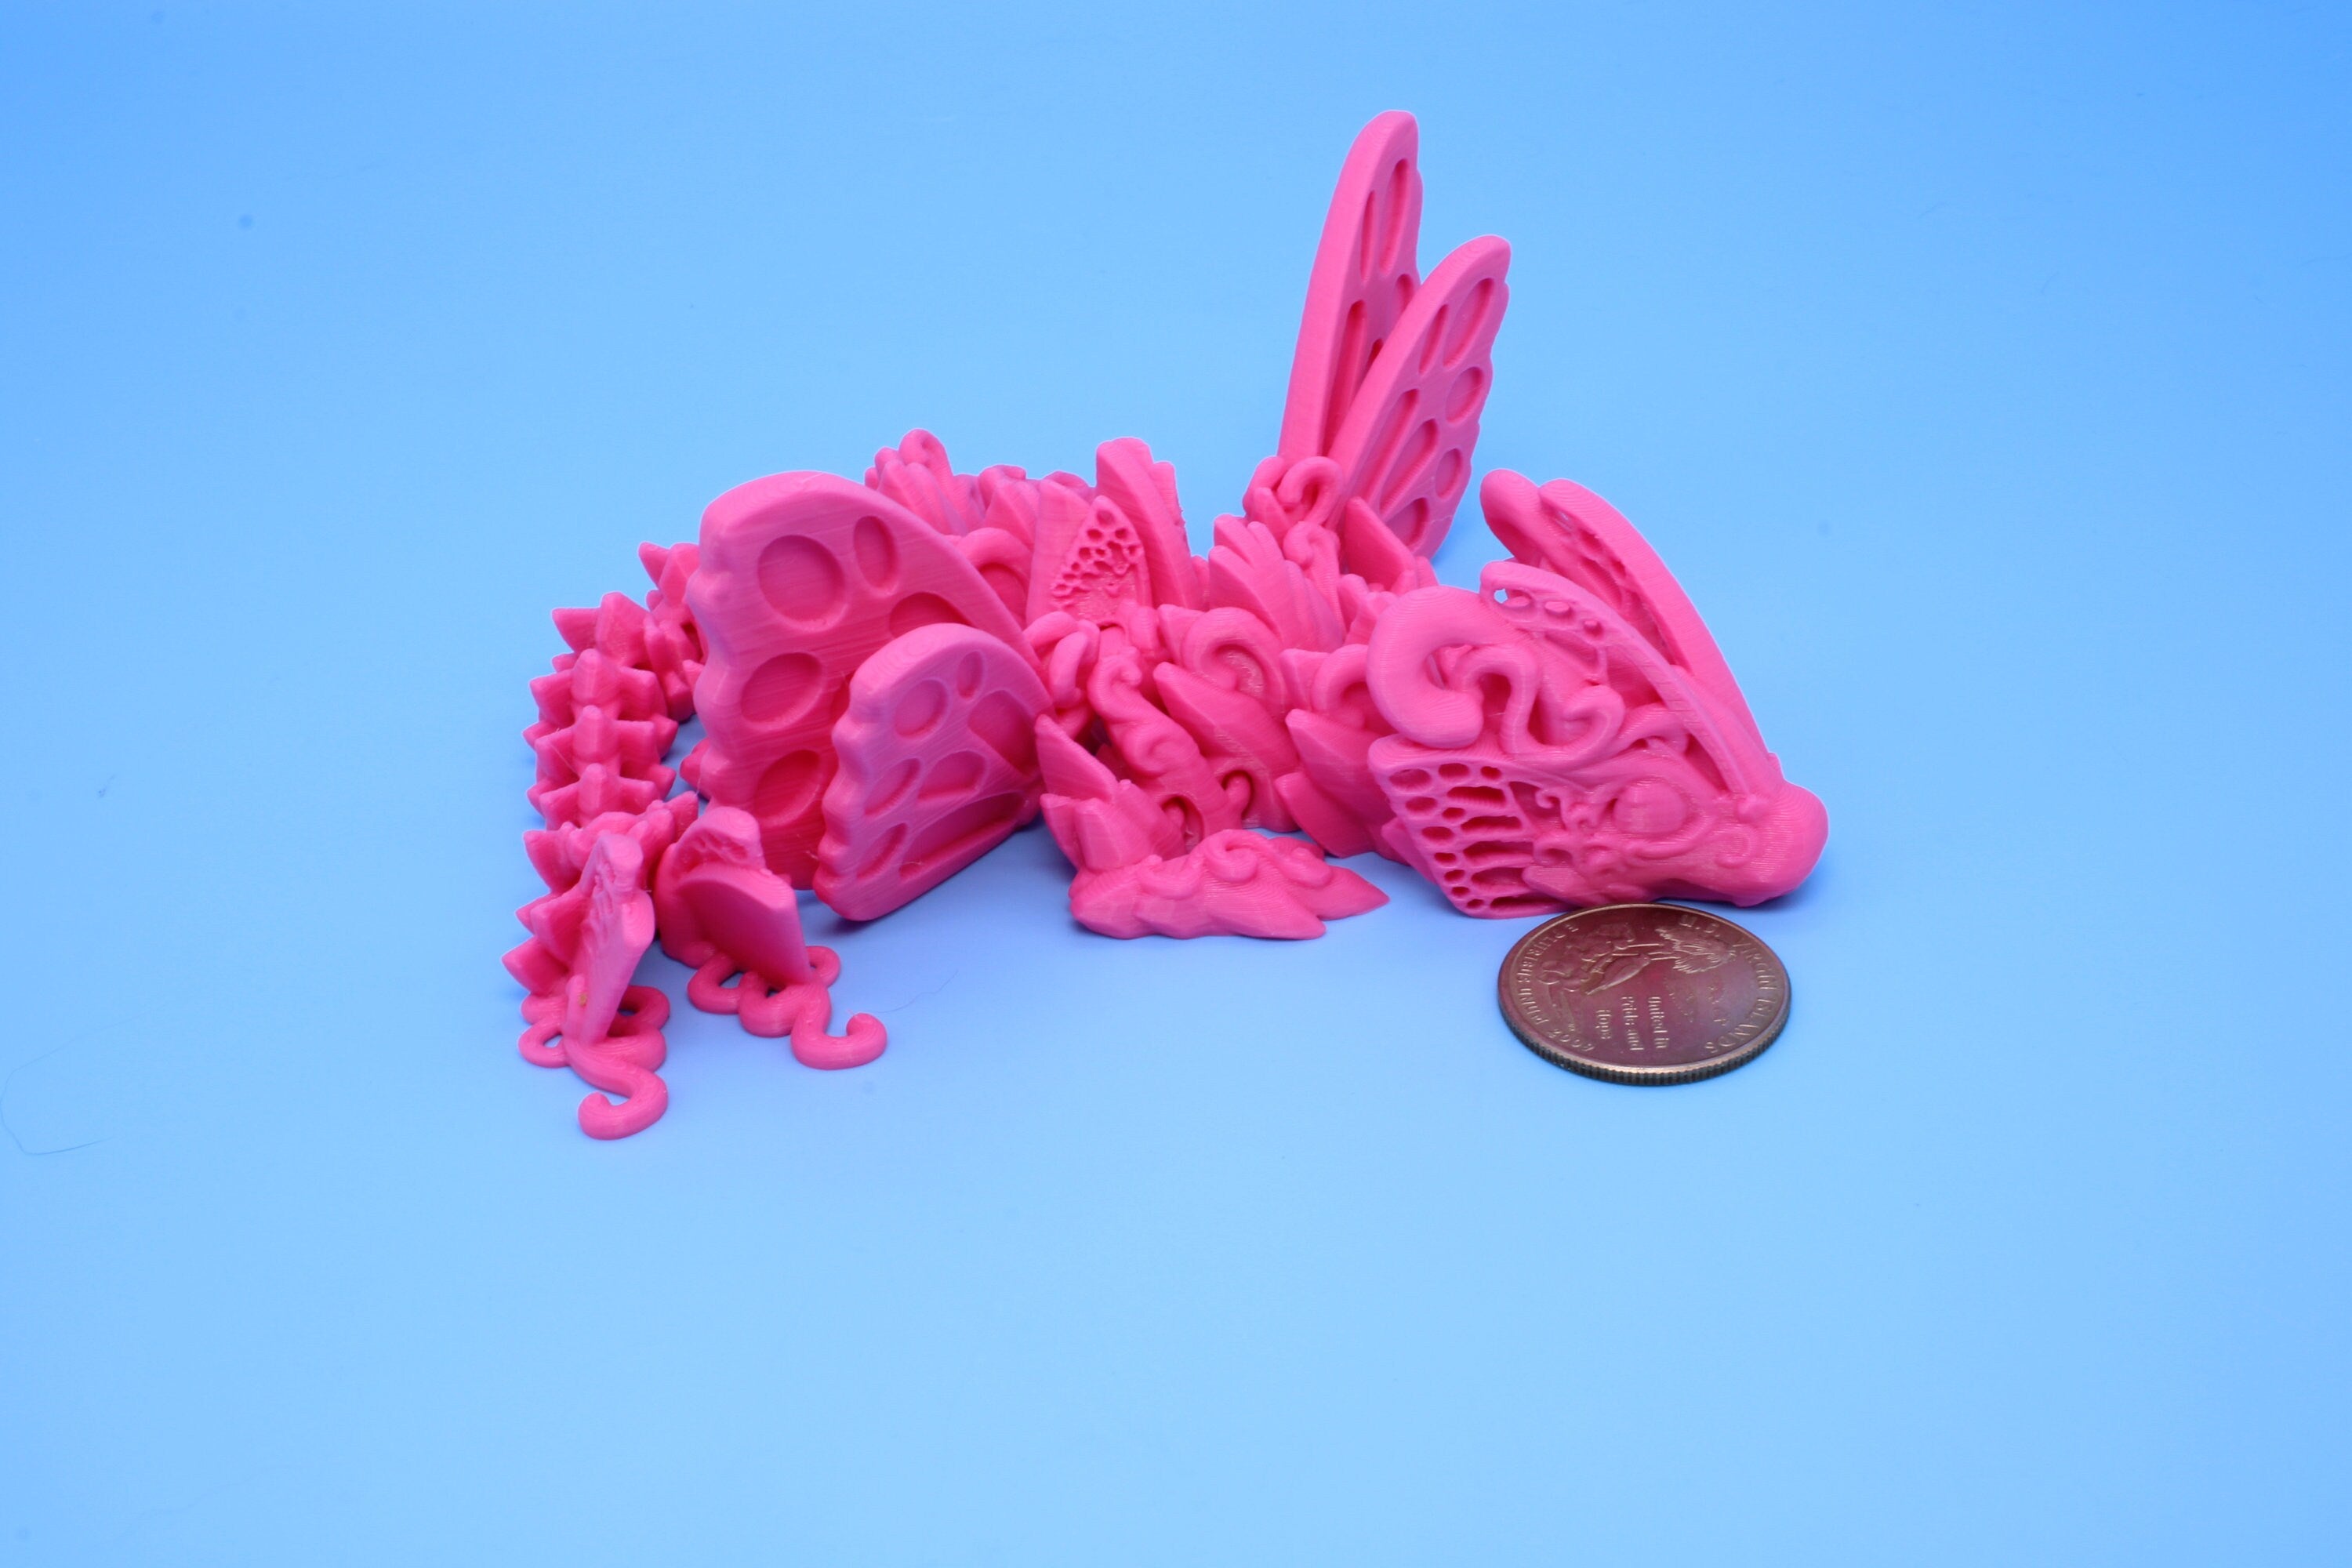 Butterfly Wing Dragon | 3D Printed, Miniature Articulating Dragon 8 in.